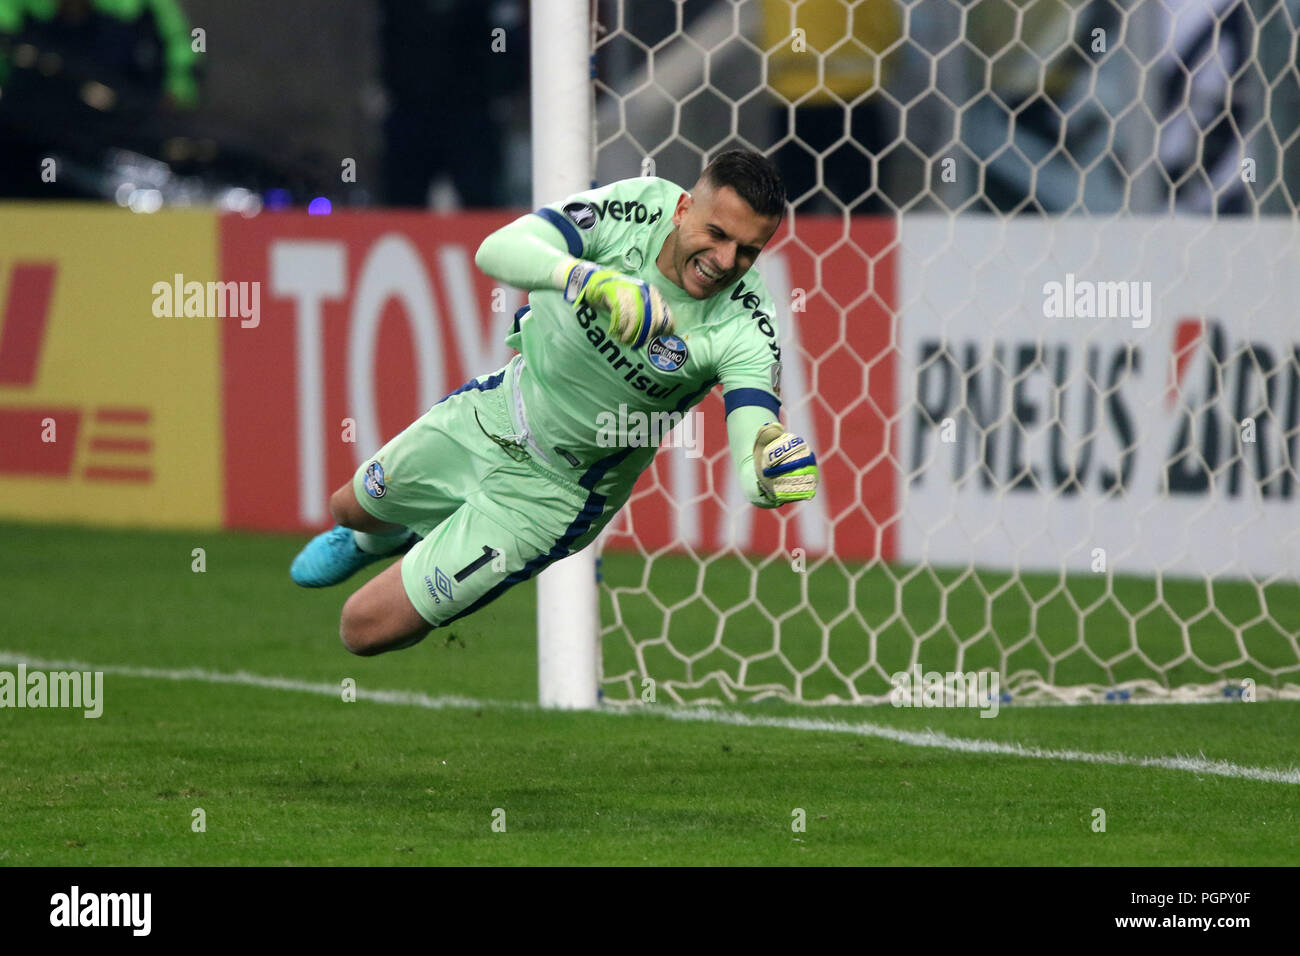 Porto Alegre, Brazil. 28th Aug, 2018. Marcelo Grohe during a penalty shootout in Gremio vs. Estudiantes, a game that was valid for the second round of Conmebol Libertadores 2018. It was played at the Guild Arena on Tuesday night (28). Credit: Raul Pereira/FotoArena/Alamy Live News Stock Photo